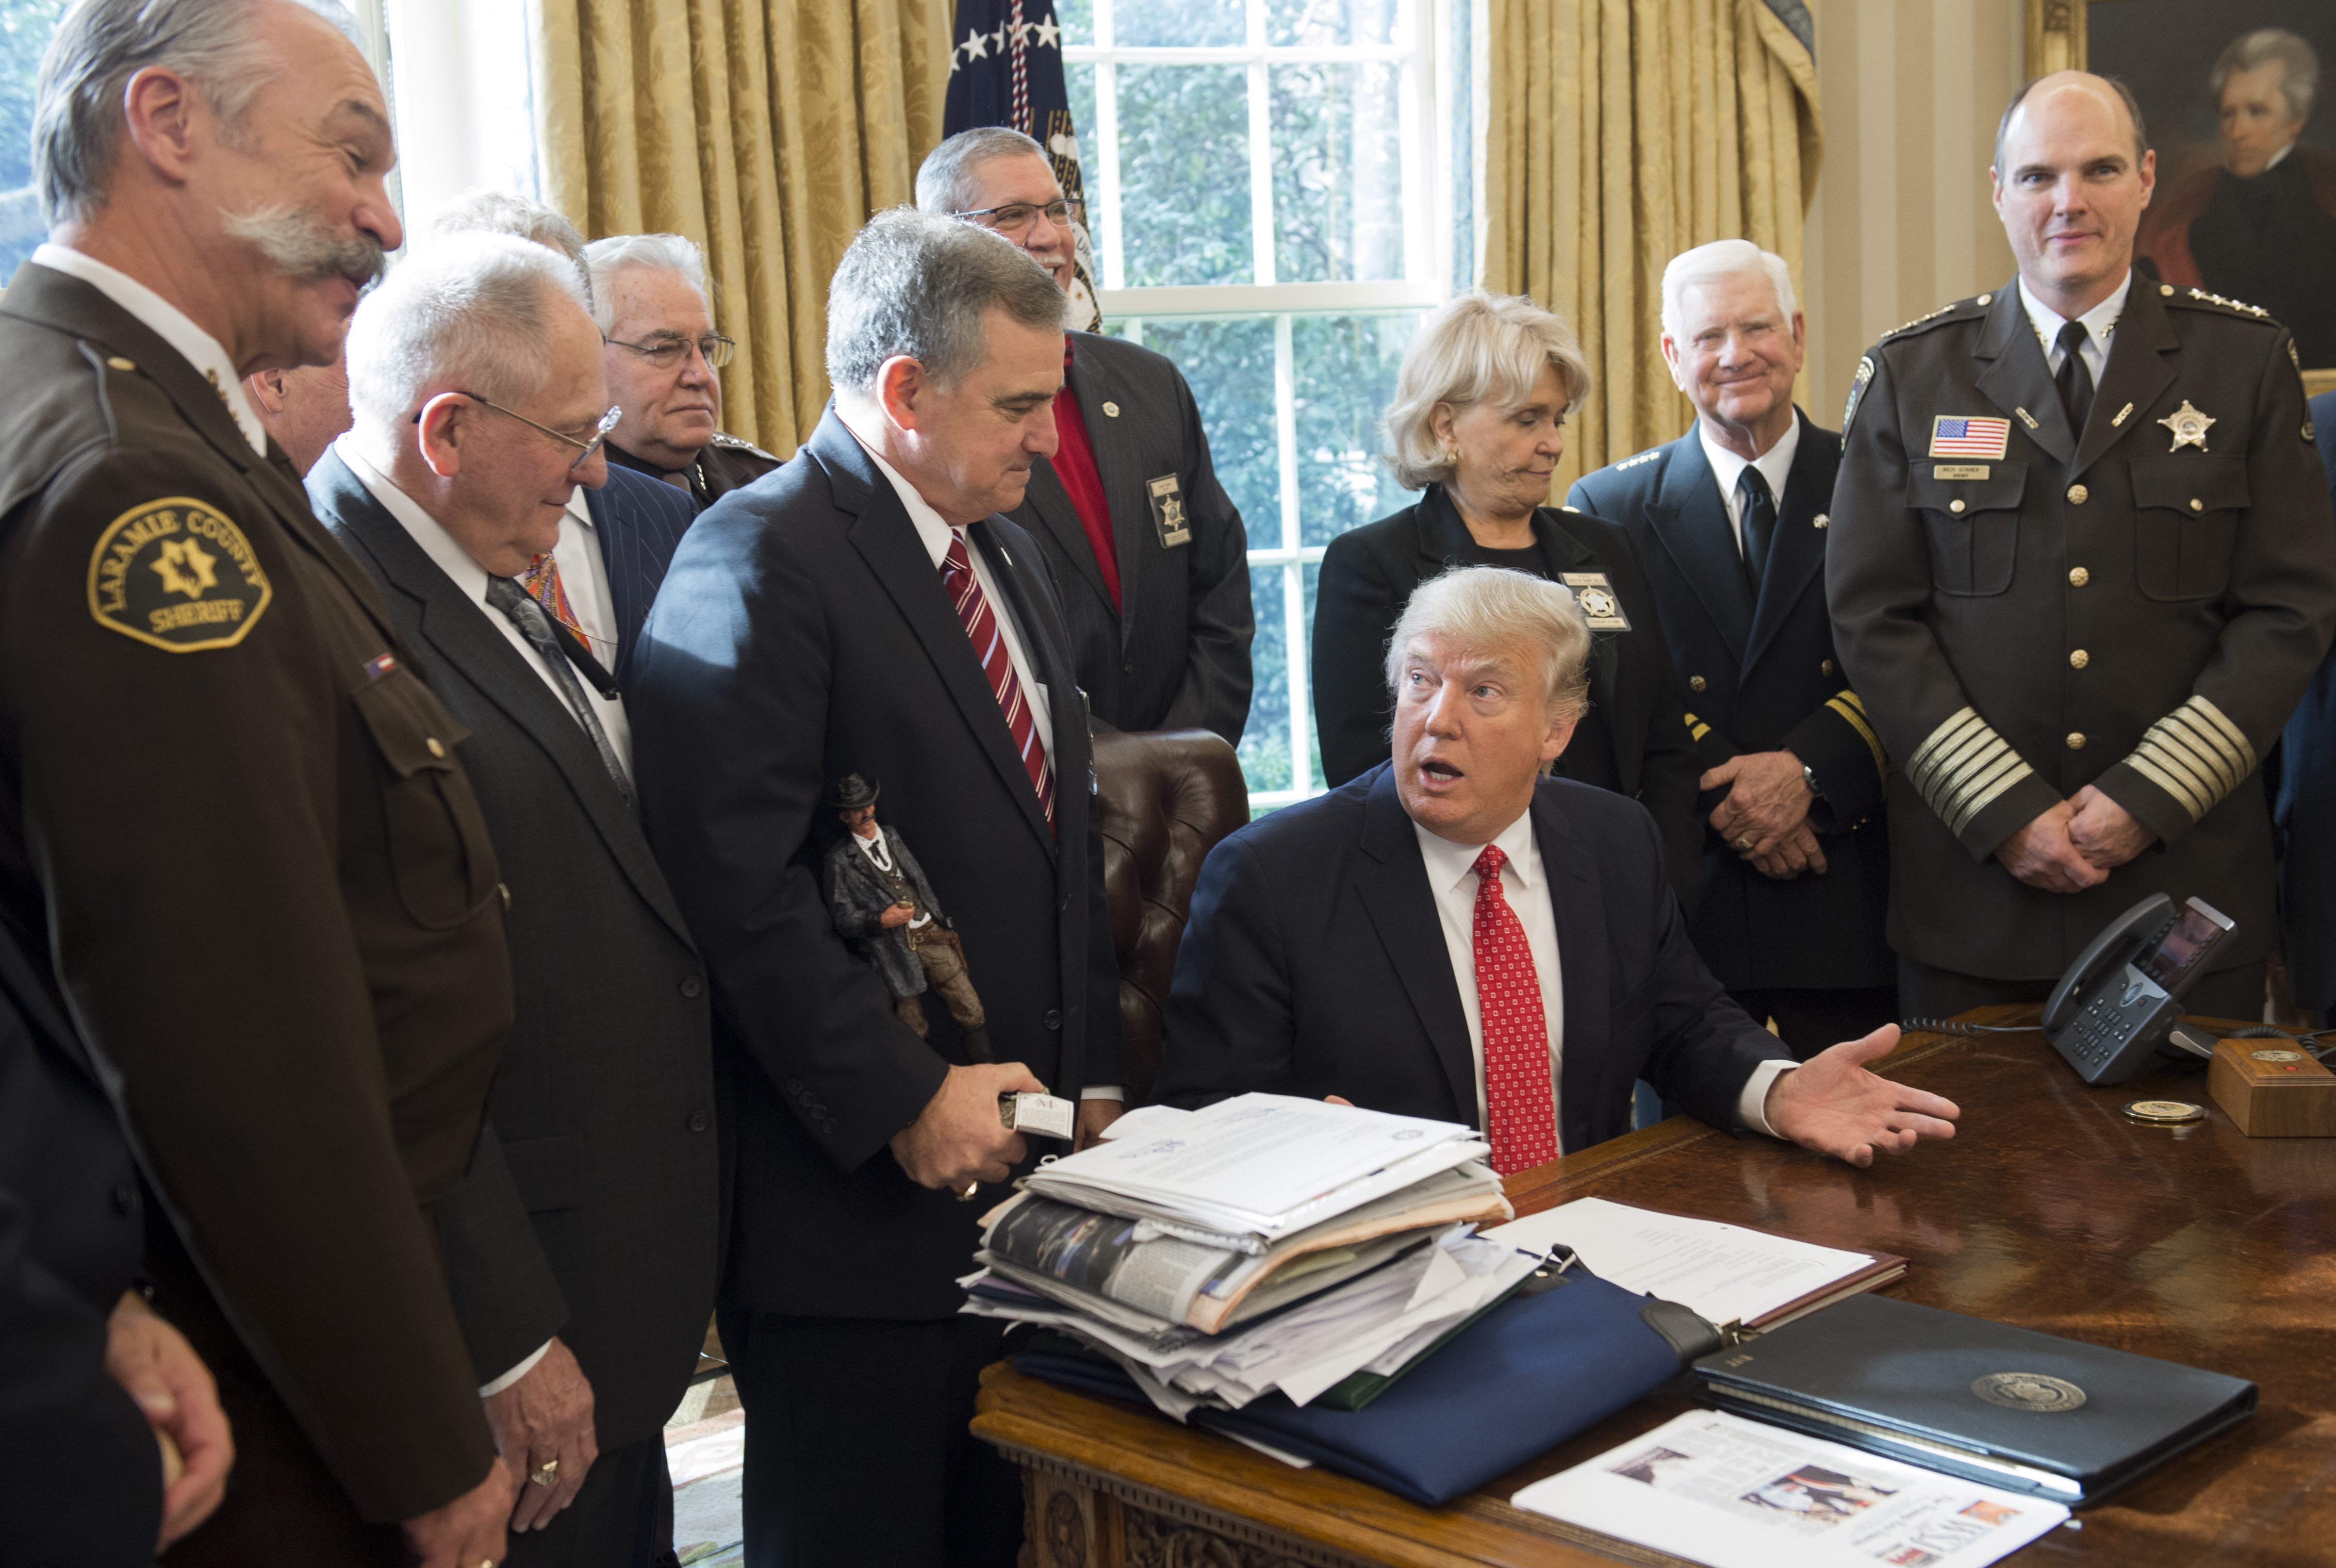 President Donald Trump and Sheriff Rich Stanek (far right) (credit: SAUL LOEB/AFP/Getty Images)